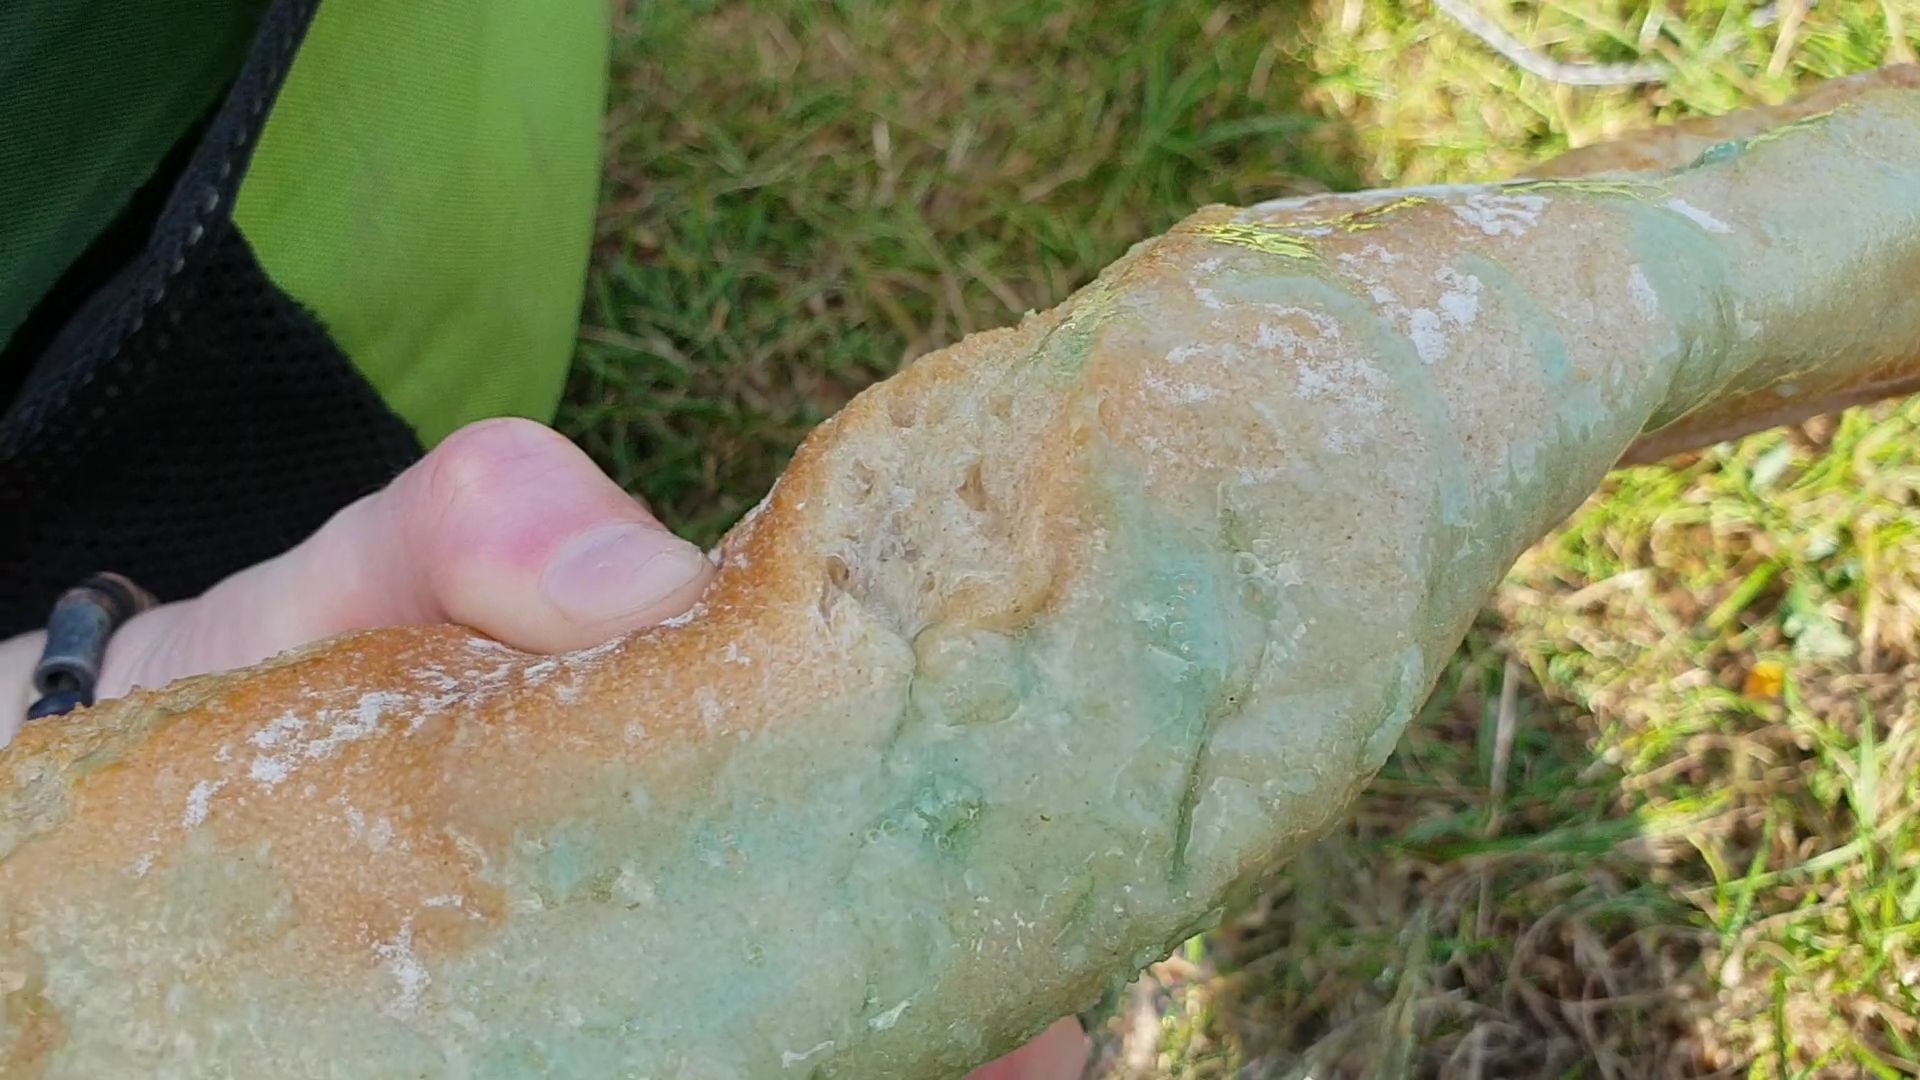 A baguette covered in spilled washing up liquid.